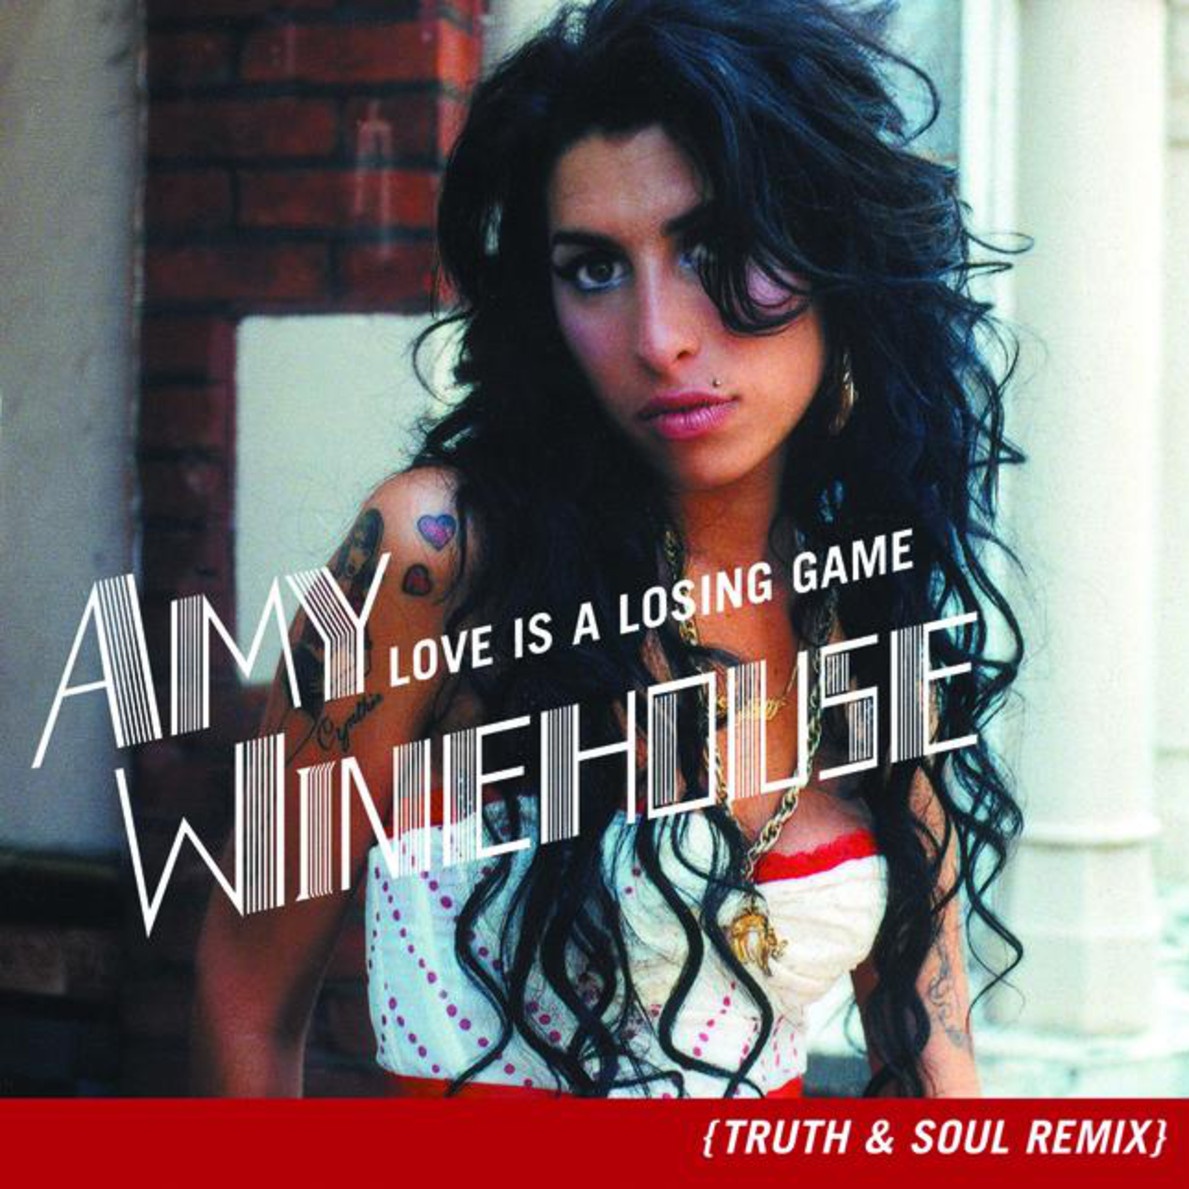 Love Is A Losing Game - Truth & Soul Remix